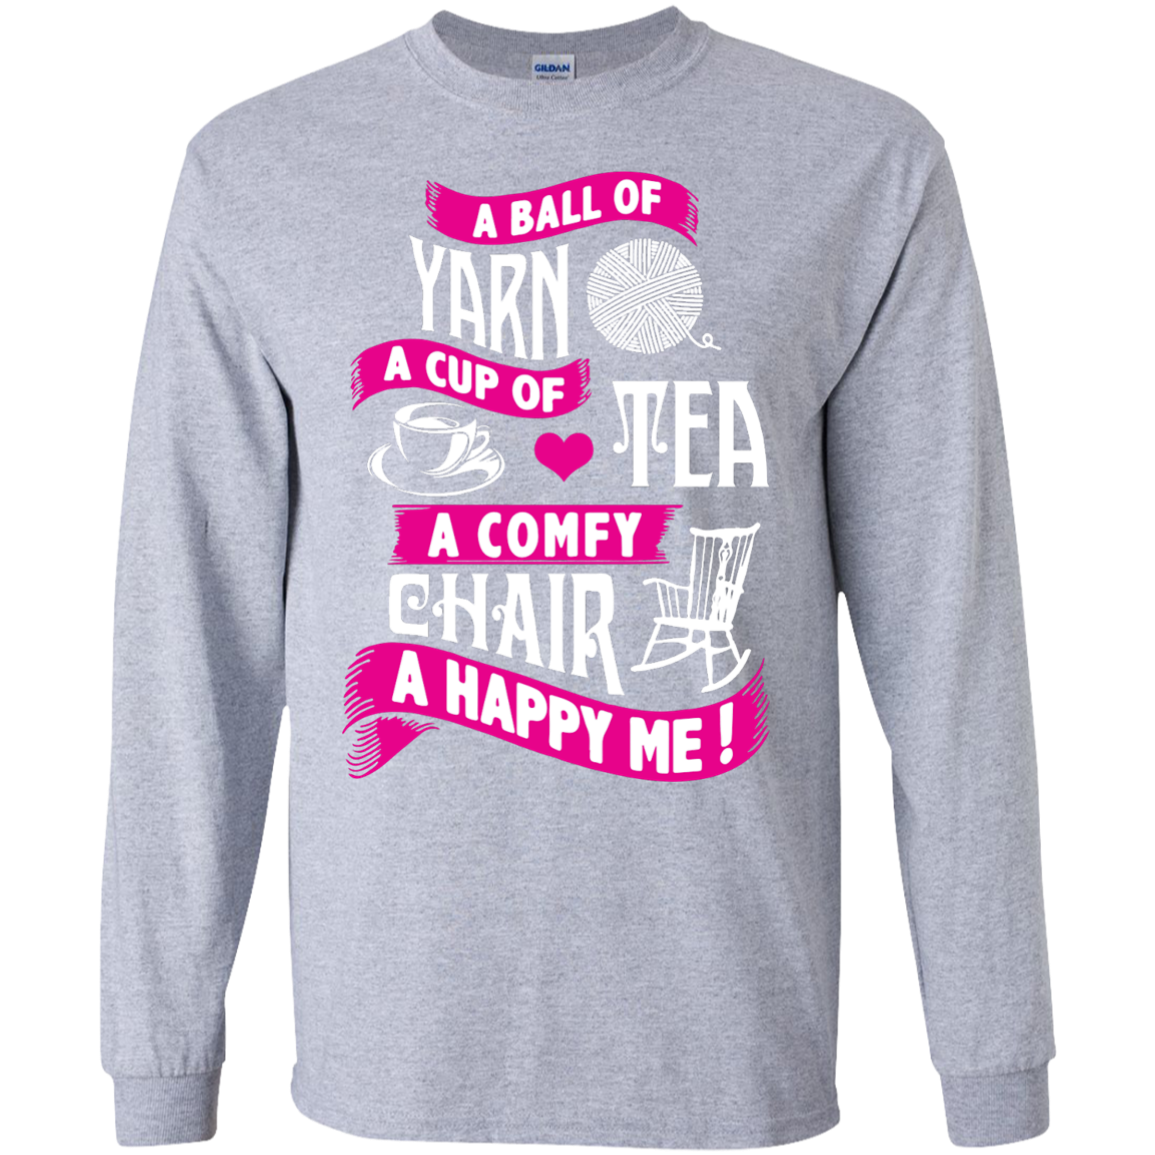 A Ball of Yarn, A Happy Me Long Sleeve Ultra Cotton Tshirt - Crafter4Life - 4